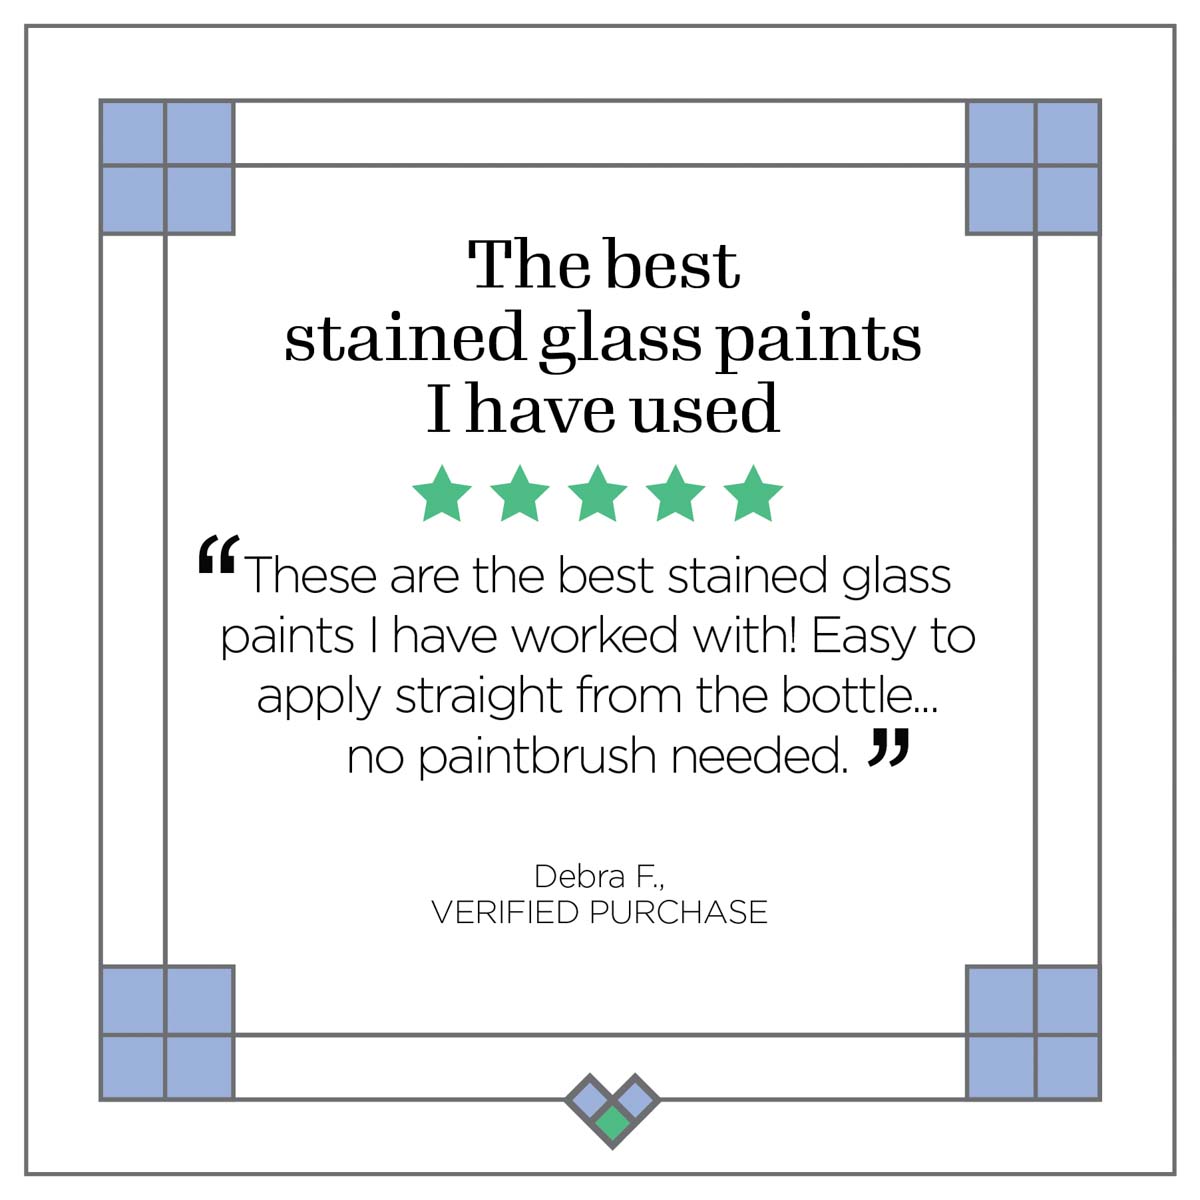 Gallery Glass ® Iridescent™ Stained Glass Effect Paint - Blue-Green-Gold, 2 oz. - 19669